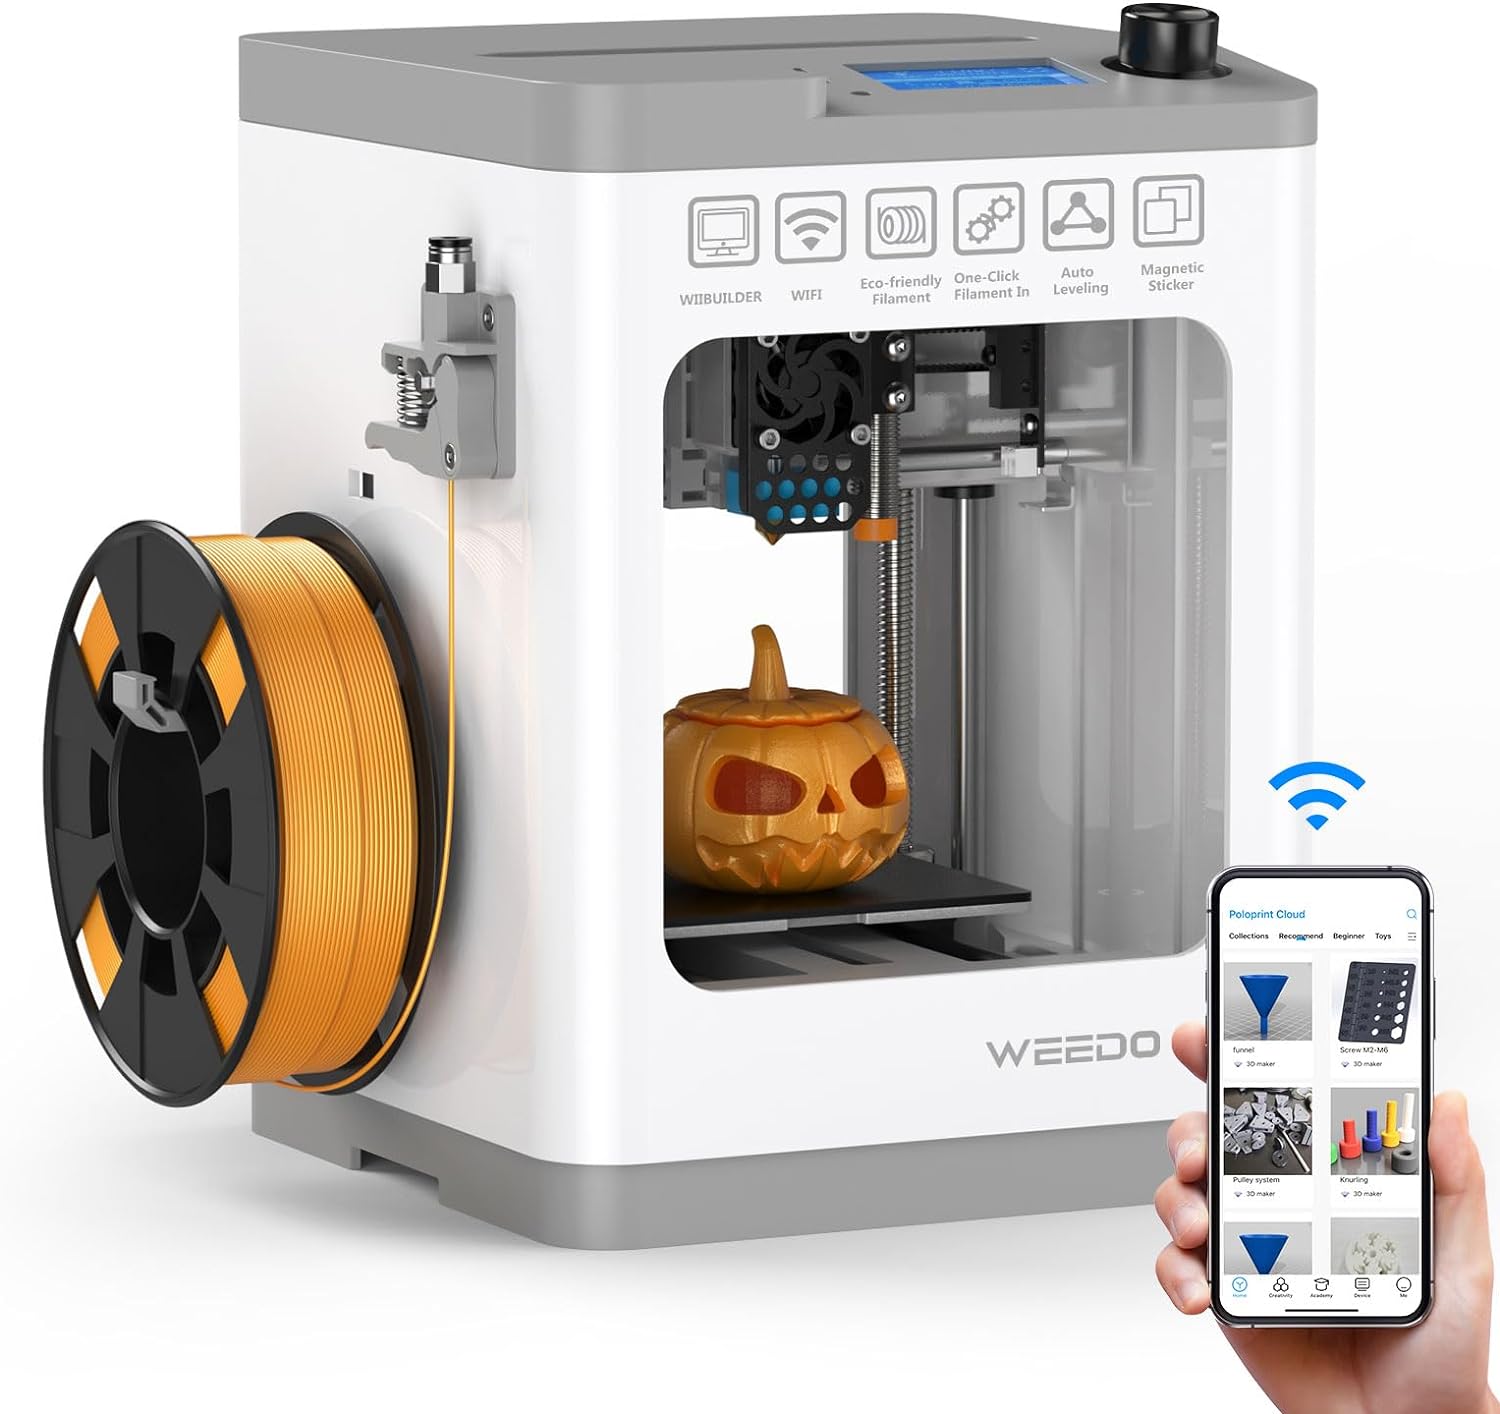 tina2s-3d-printers-for-kids-and-beginners-mini-3d-printer-with-wi-fi-printing-and-auto-leveling-fully-assembled-small-3d Mini Wi-Fi 3D Printing Review